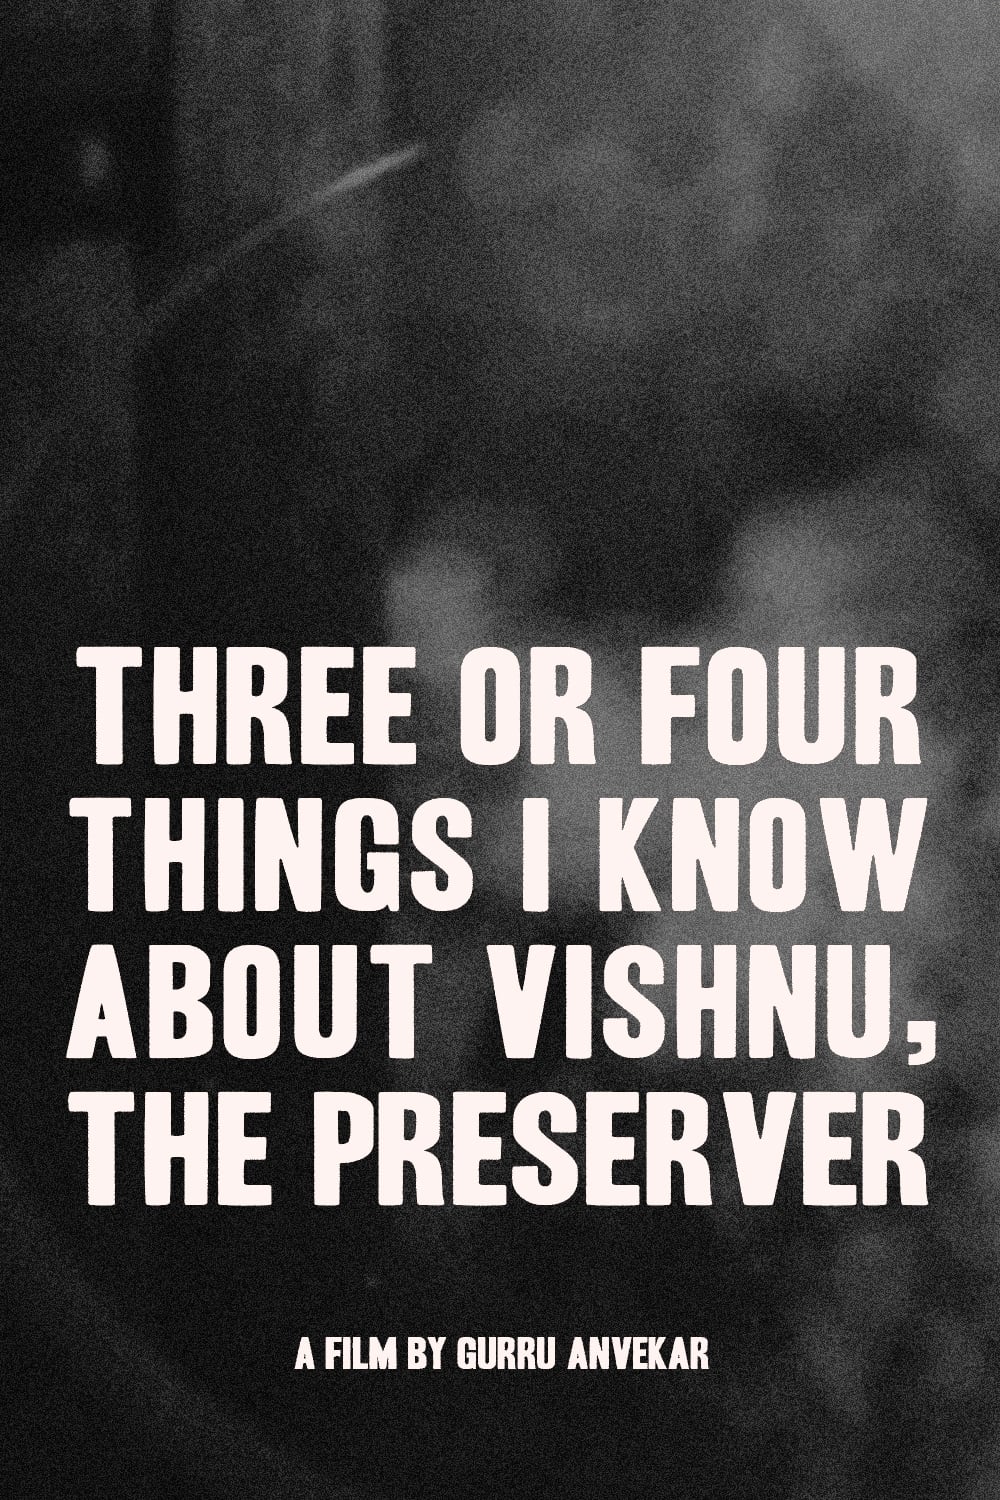 Three or Four Things I Know About Vishnu, The Preserver